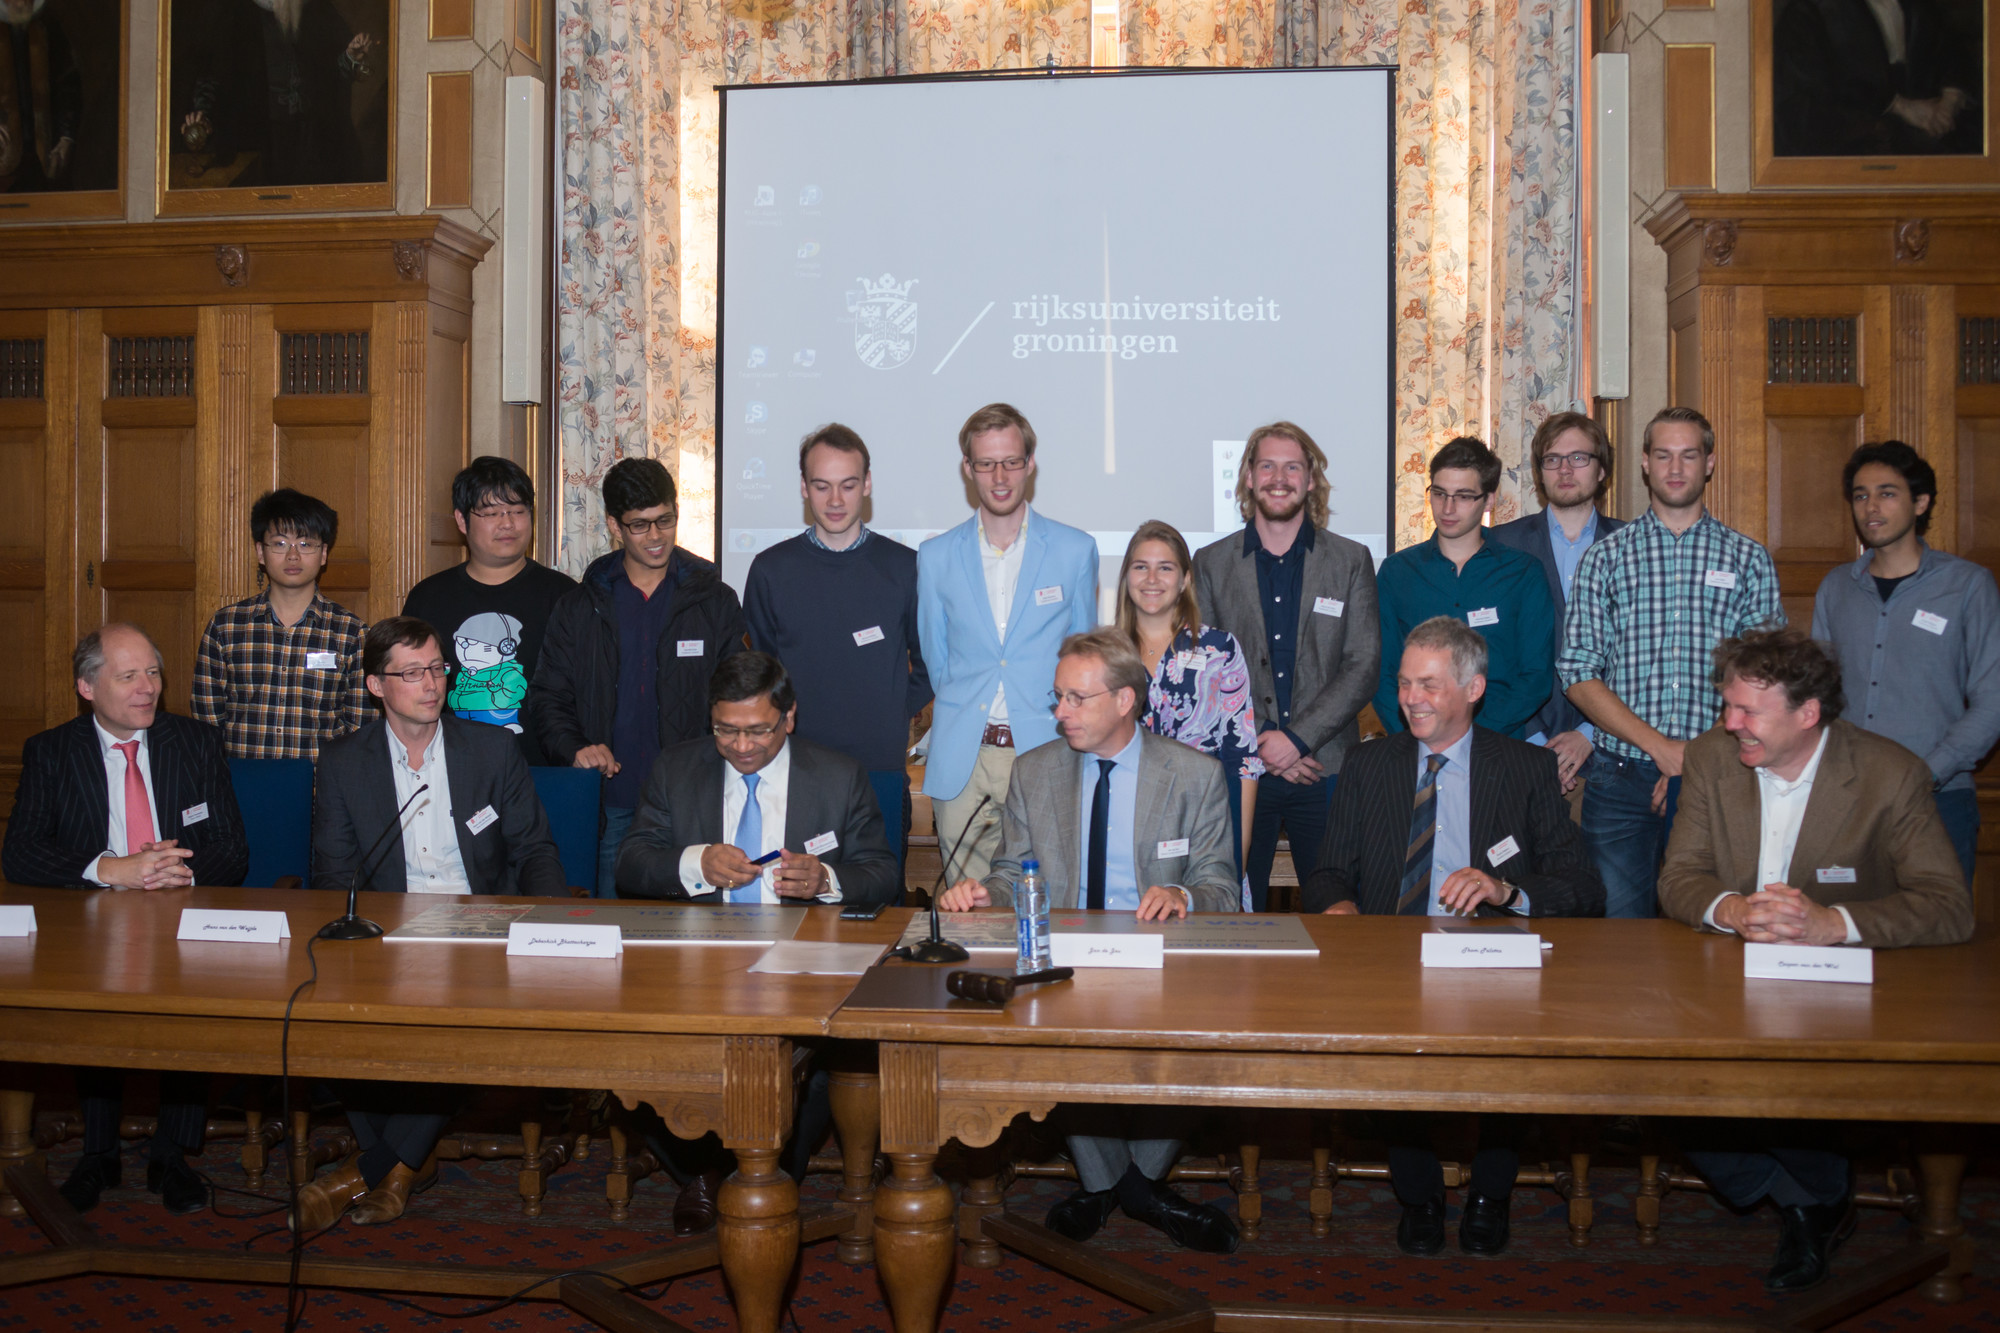 The signing of the agreement between Tata Steel and the University of Groningen